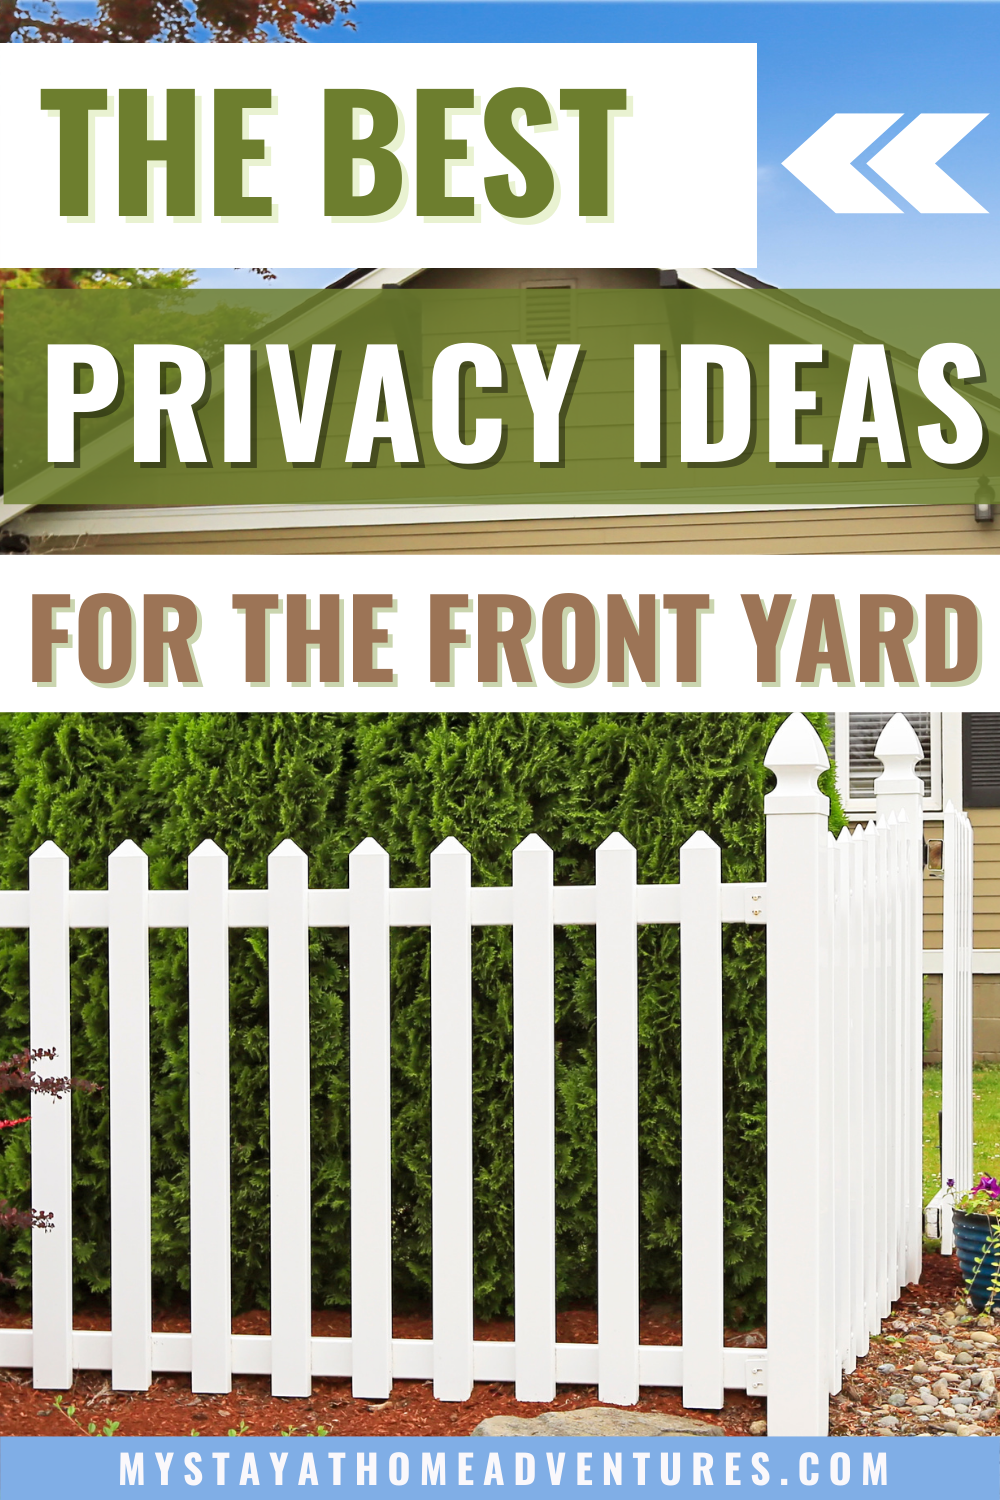 If you dread spending time in your front yard due to prying eyes, these privacy ideas will help make it a more relaxing place. via @mystayathome